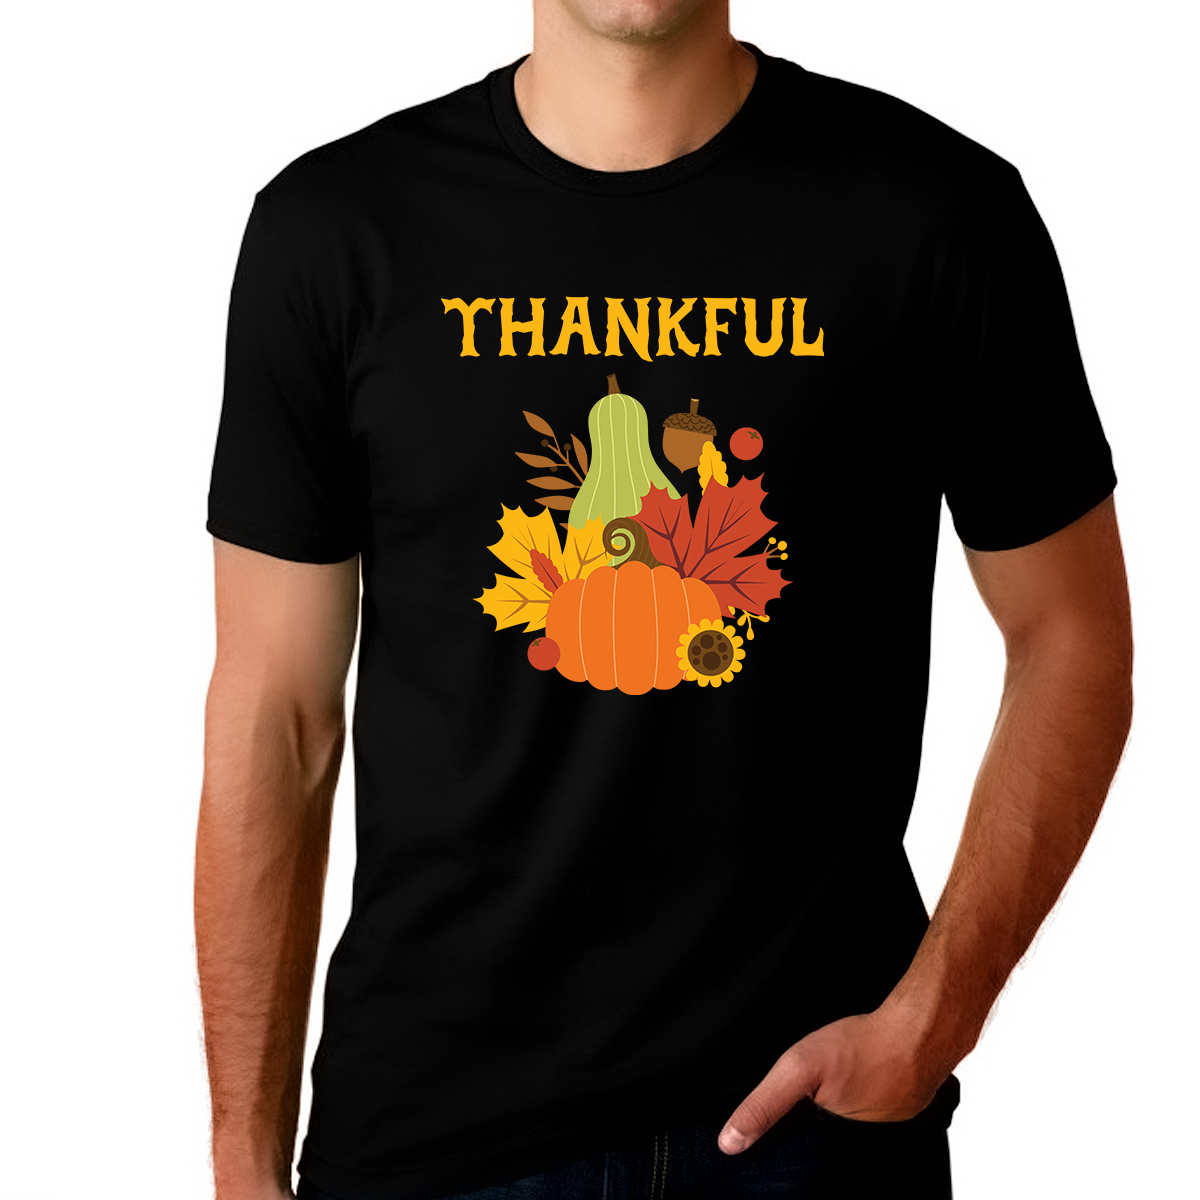 Cool Fall Shirts Funny Thanksgiving Shirts for Men Cool Fall Clothes for Men Cute Thankful Shirts for Men